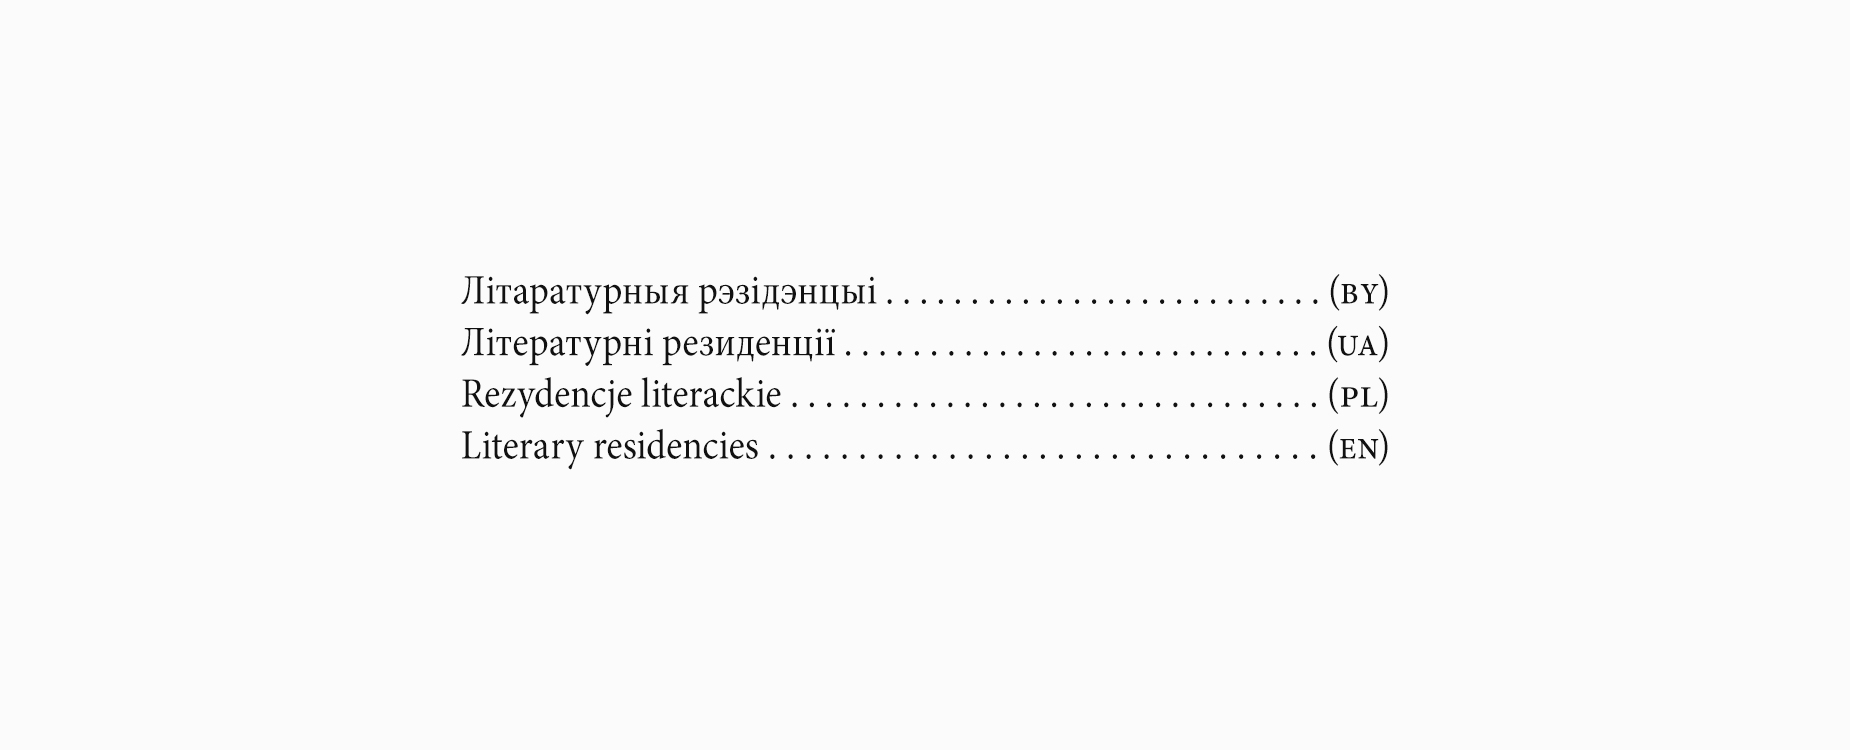 RESULTS OF AN OPEN CALL FOR LITERARY RESIDENCES  31.5.22